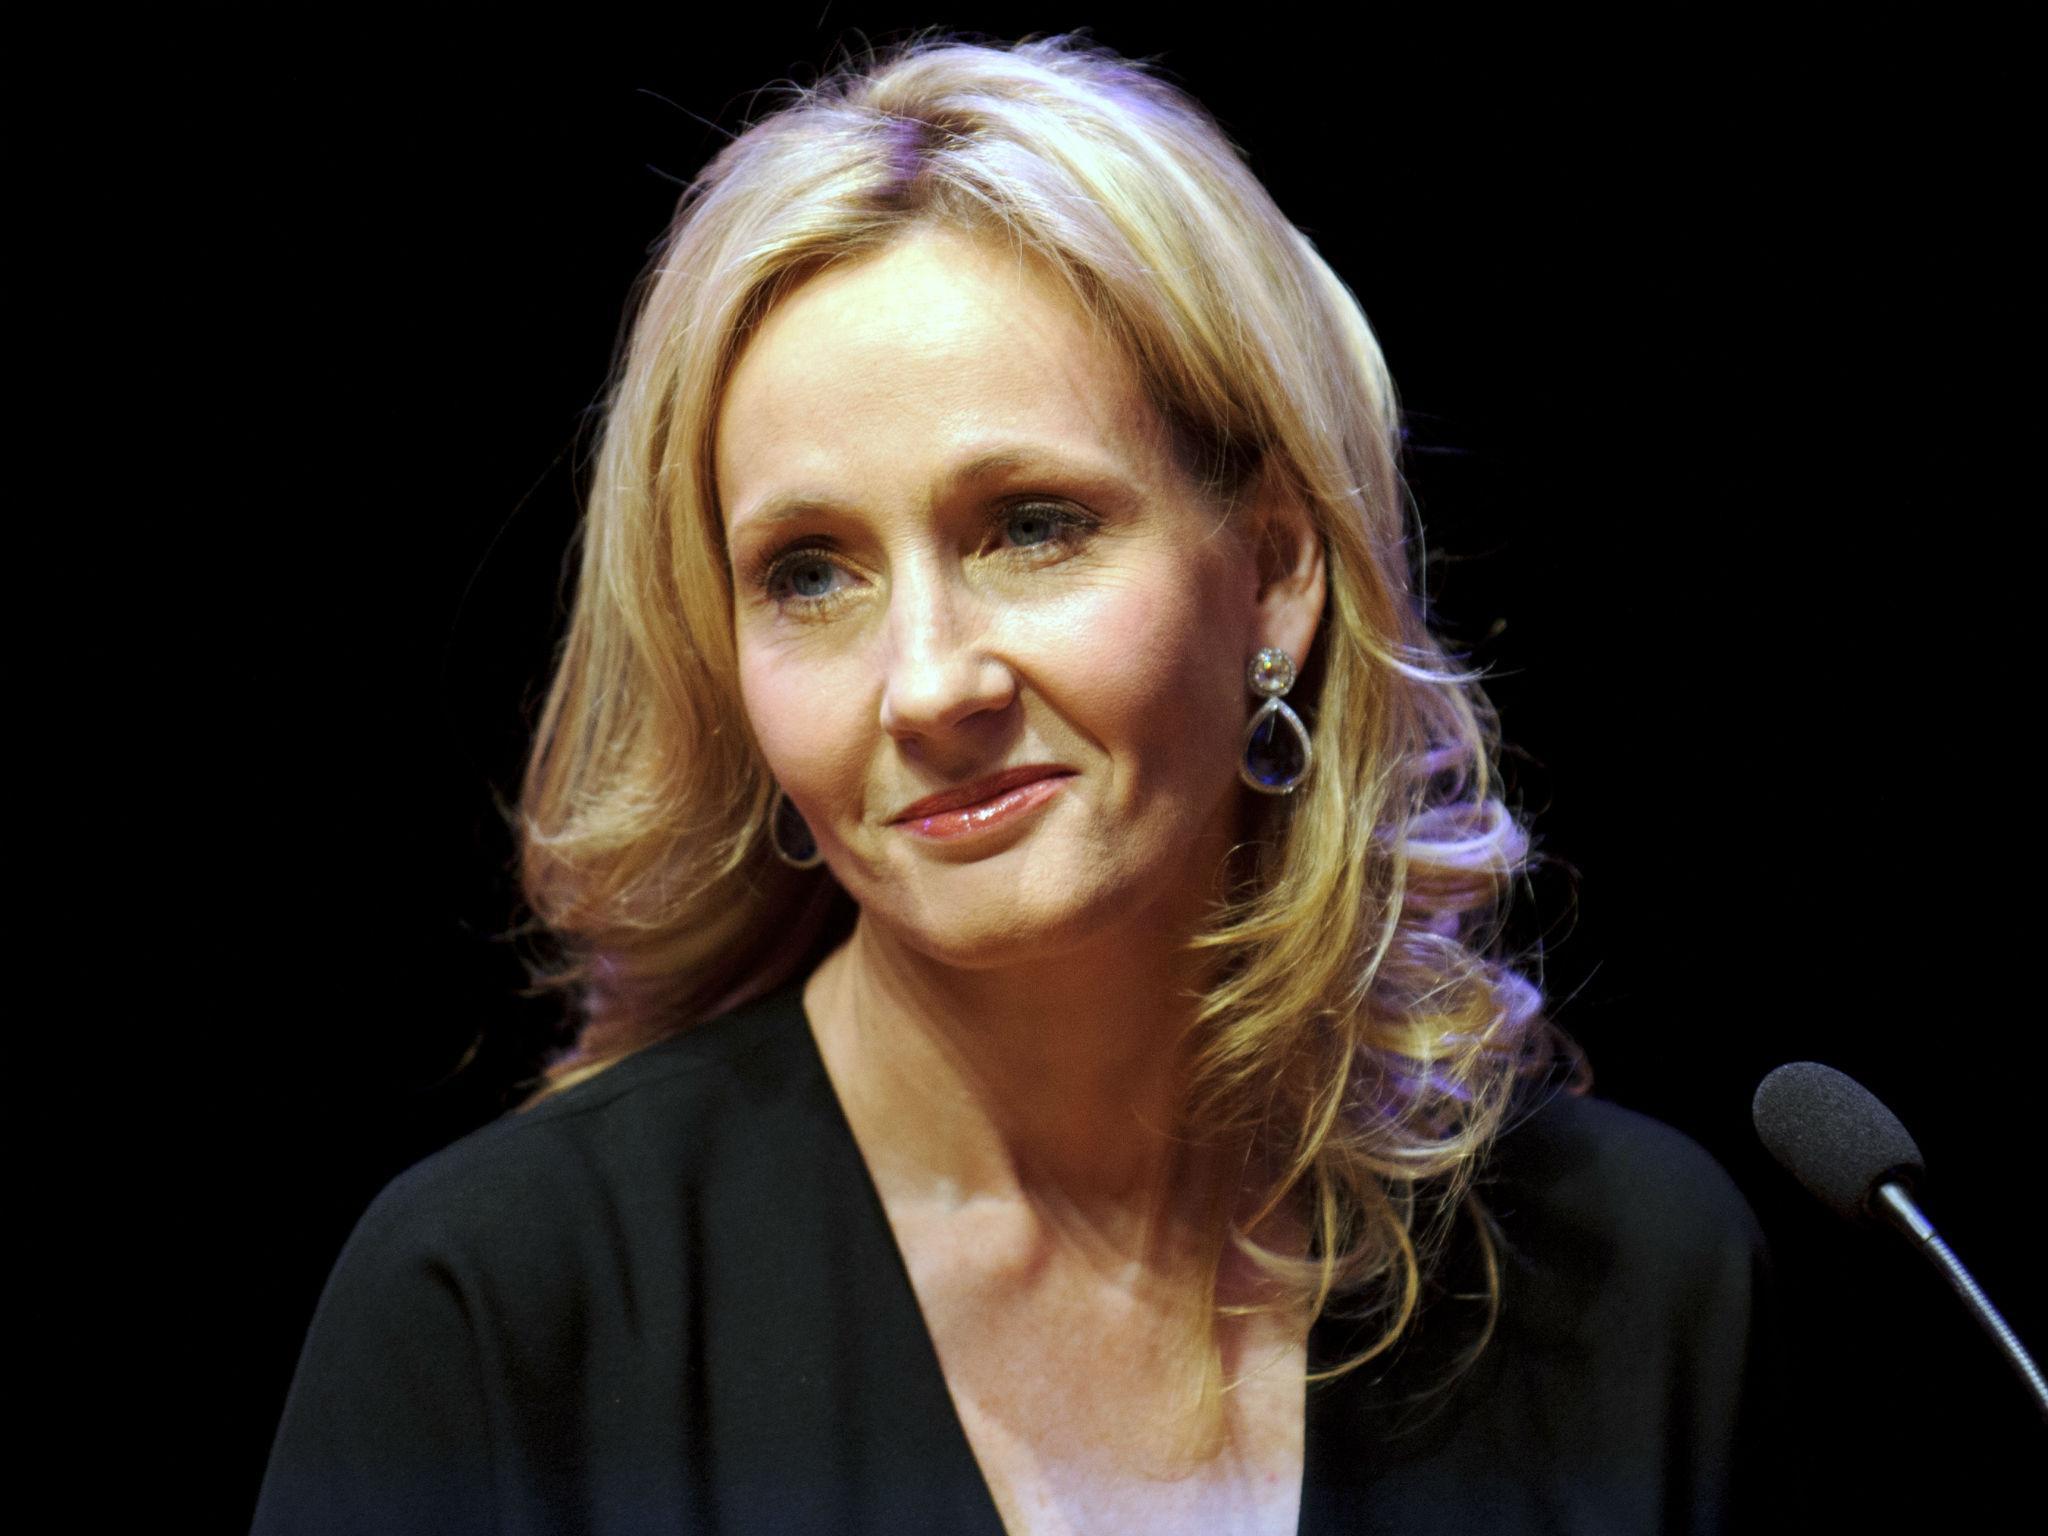 Harry Potter author JK Rowling is know to be among the most generous of wealthy Brits